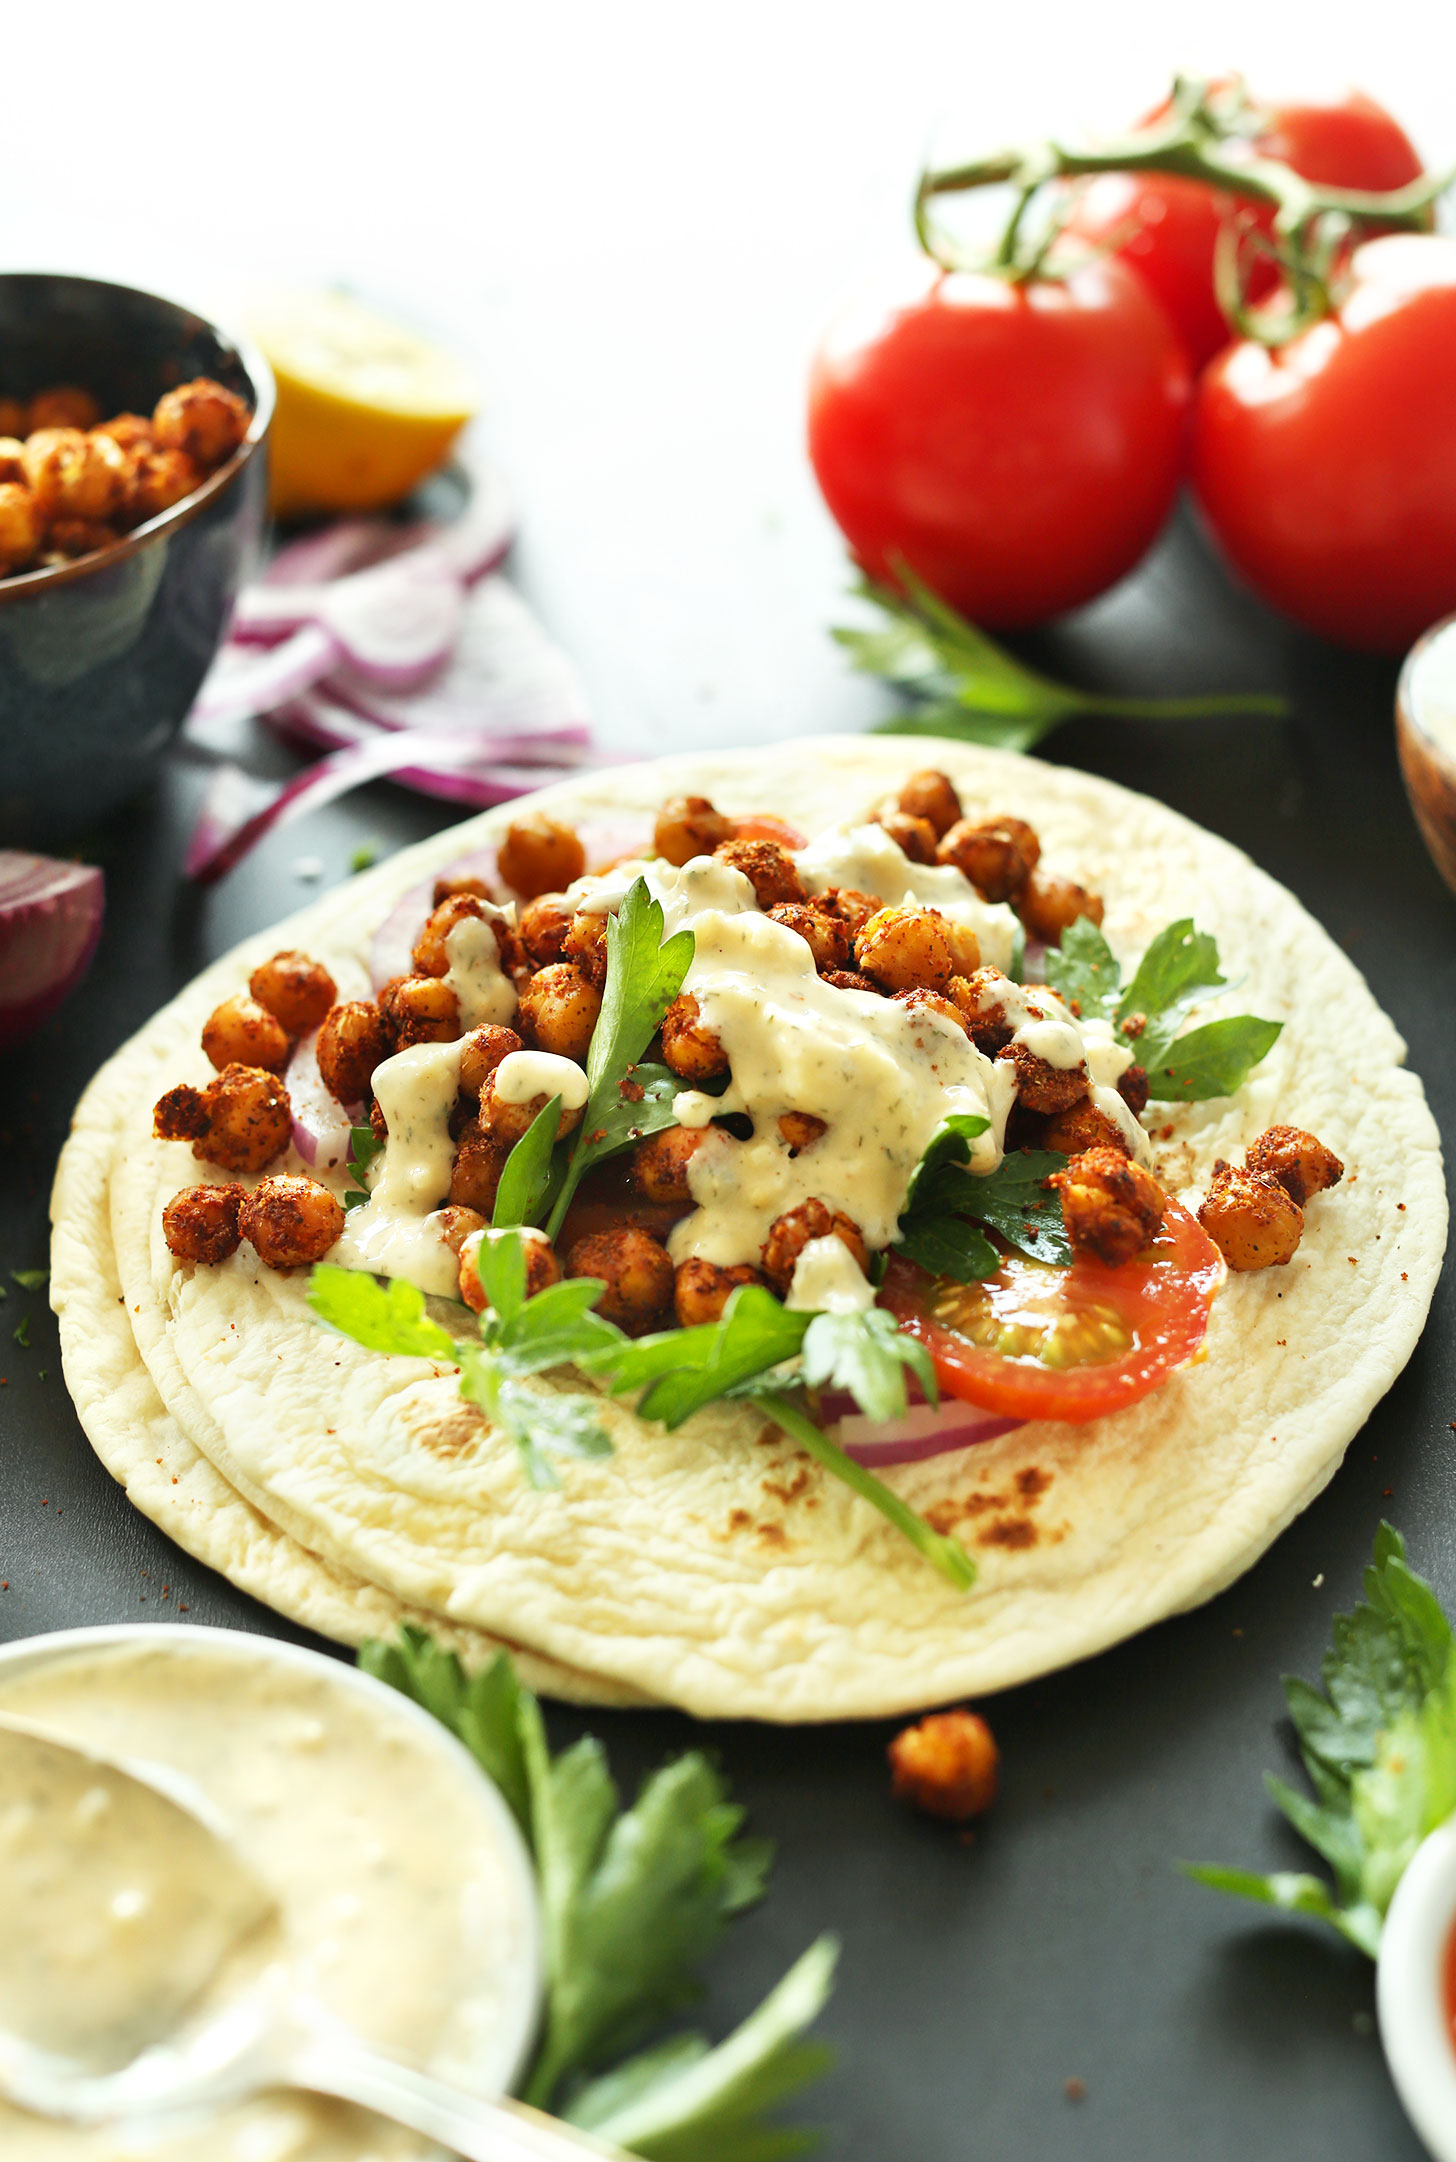 One of our simple Vegan Chickpea Shawarma Wraps ready for rolling